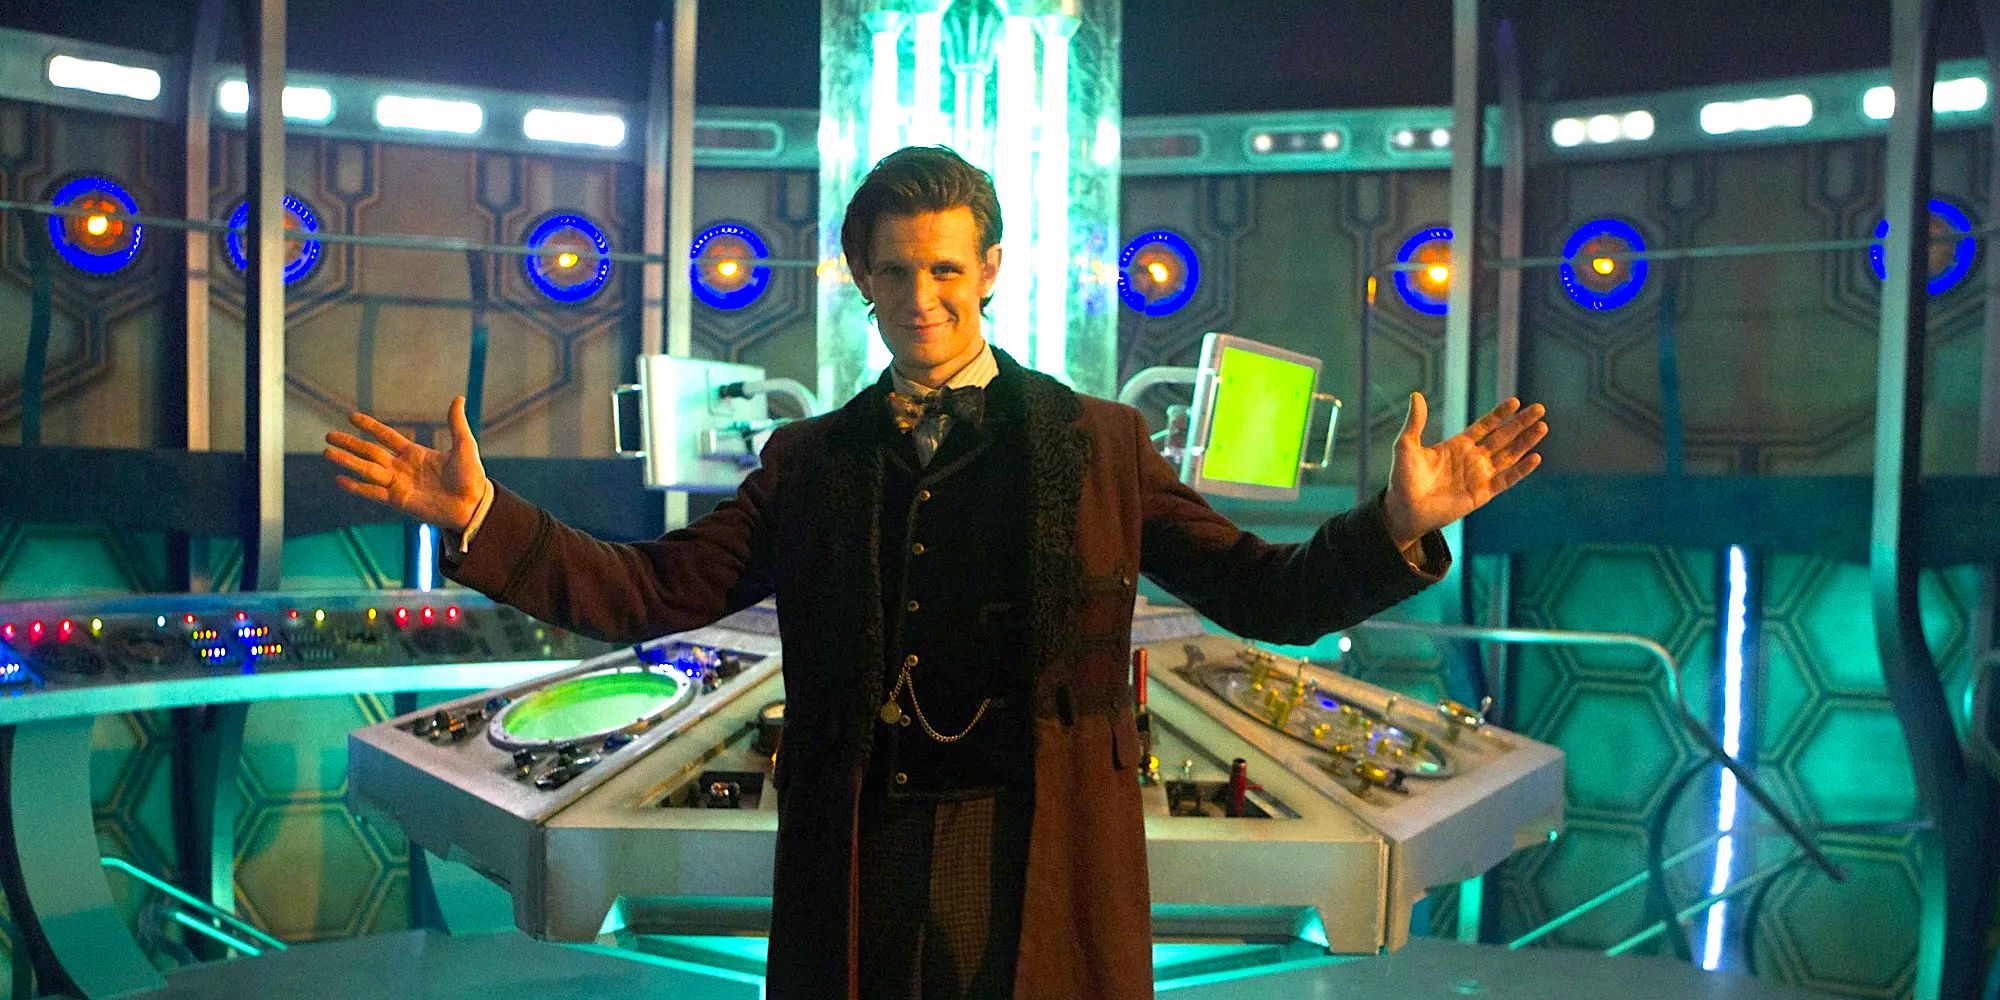 Eleventh Doctor in the redecorated Tardis in Doctor Who